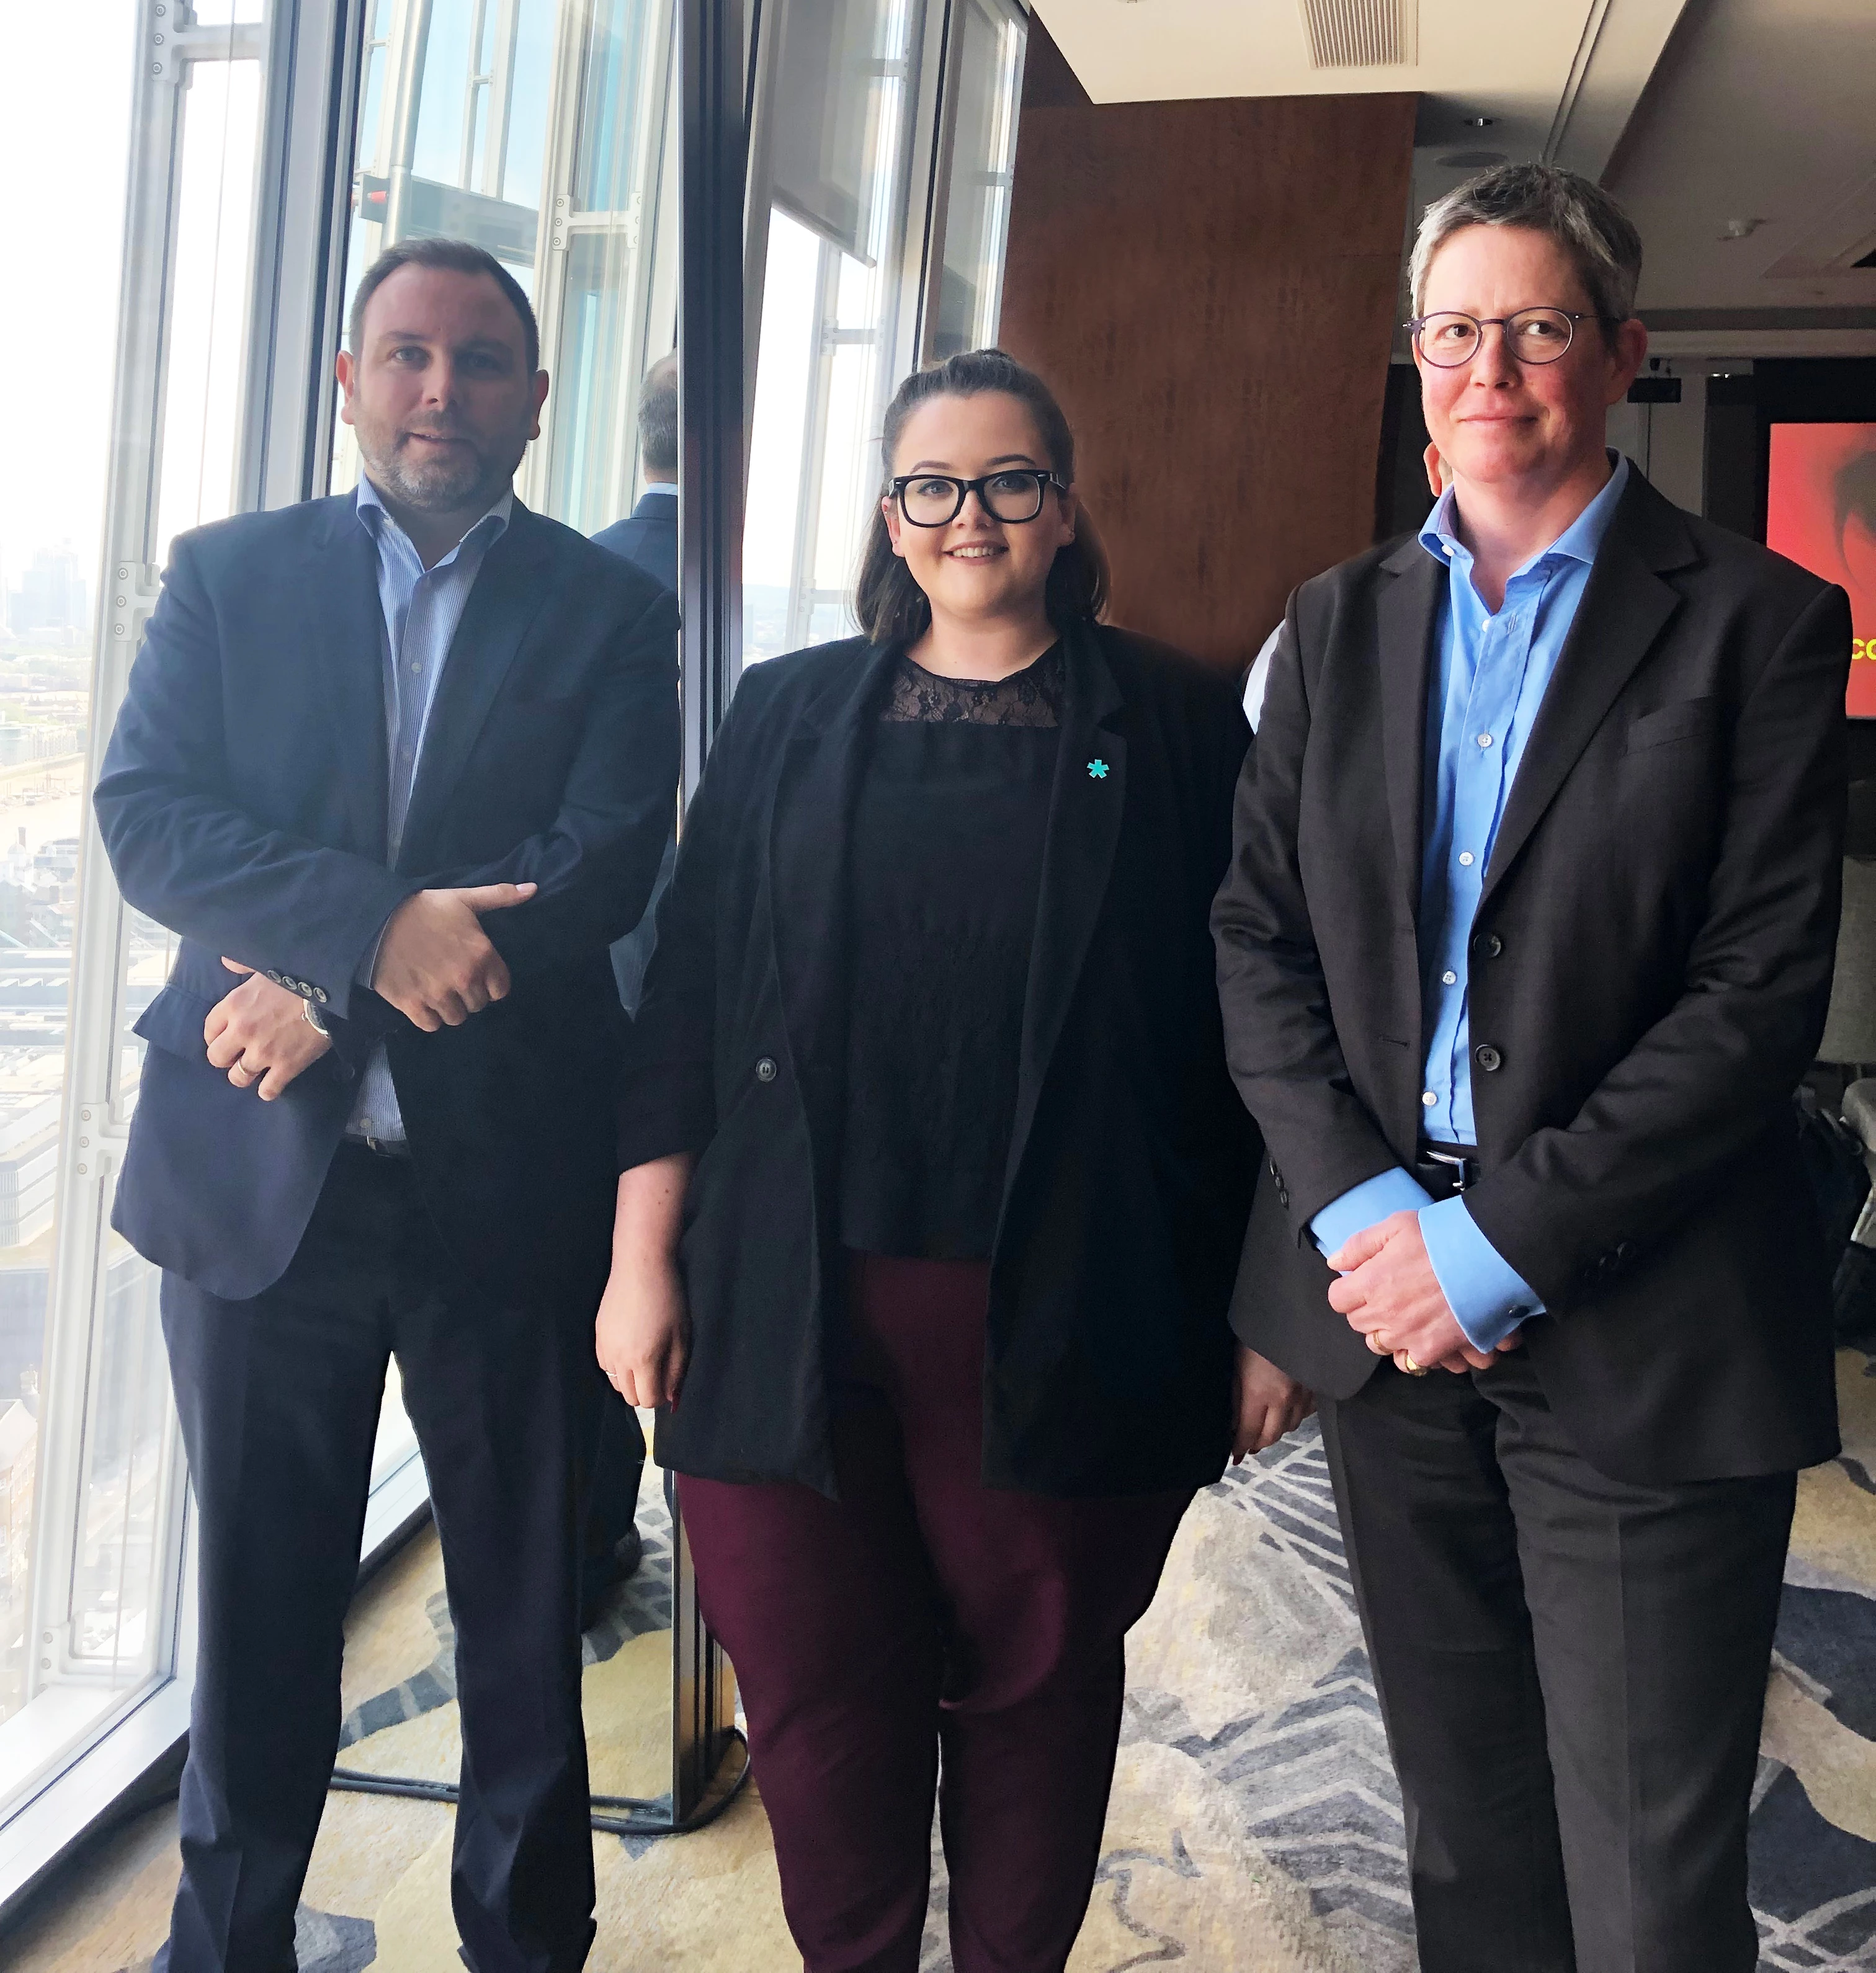 Left to right – Richard Hanaging director, Jaggaer with Aimee Laird, eCommerce delivery manager and Amabel Grant, chief technology officer of Bloom Procurement Services.